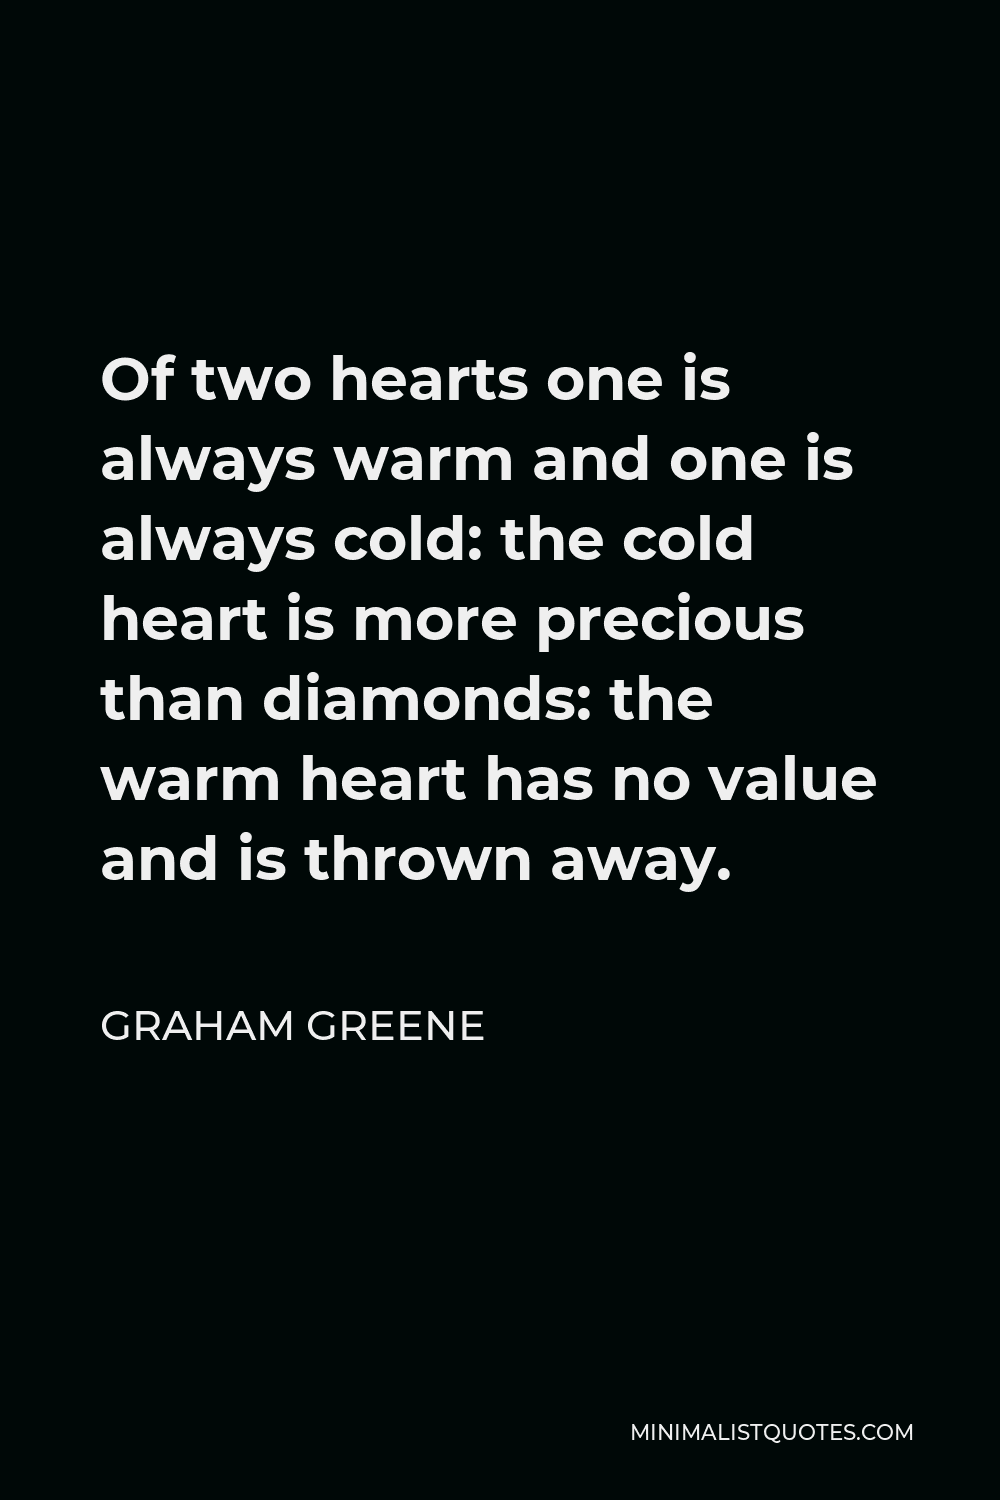 Graham Greene Quote - Of two hearts one is always warm and one is always cold: the cold heart is more precious than diamonds: the warm heart has no value and is thrown away.